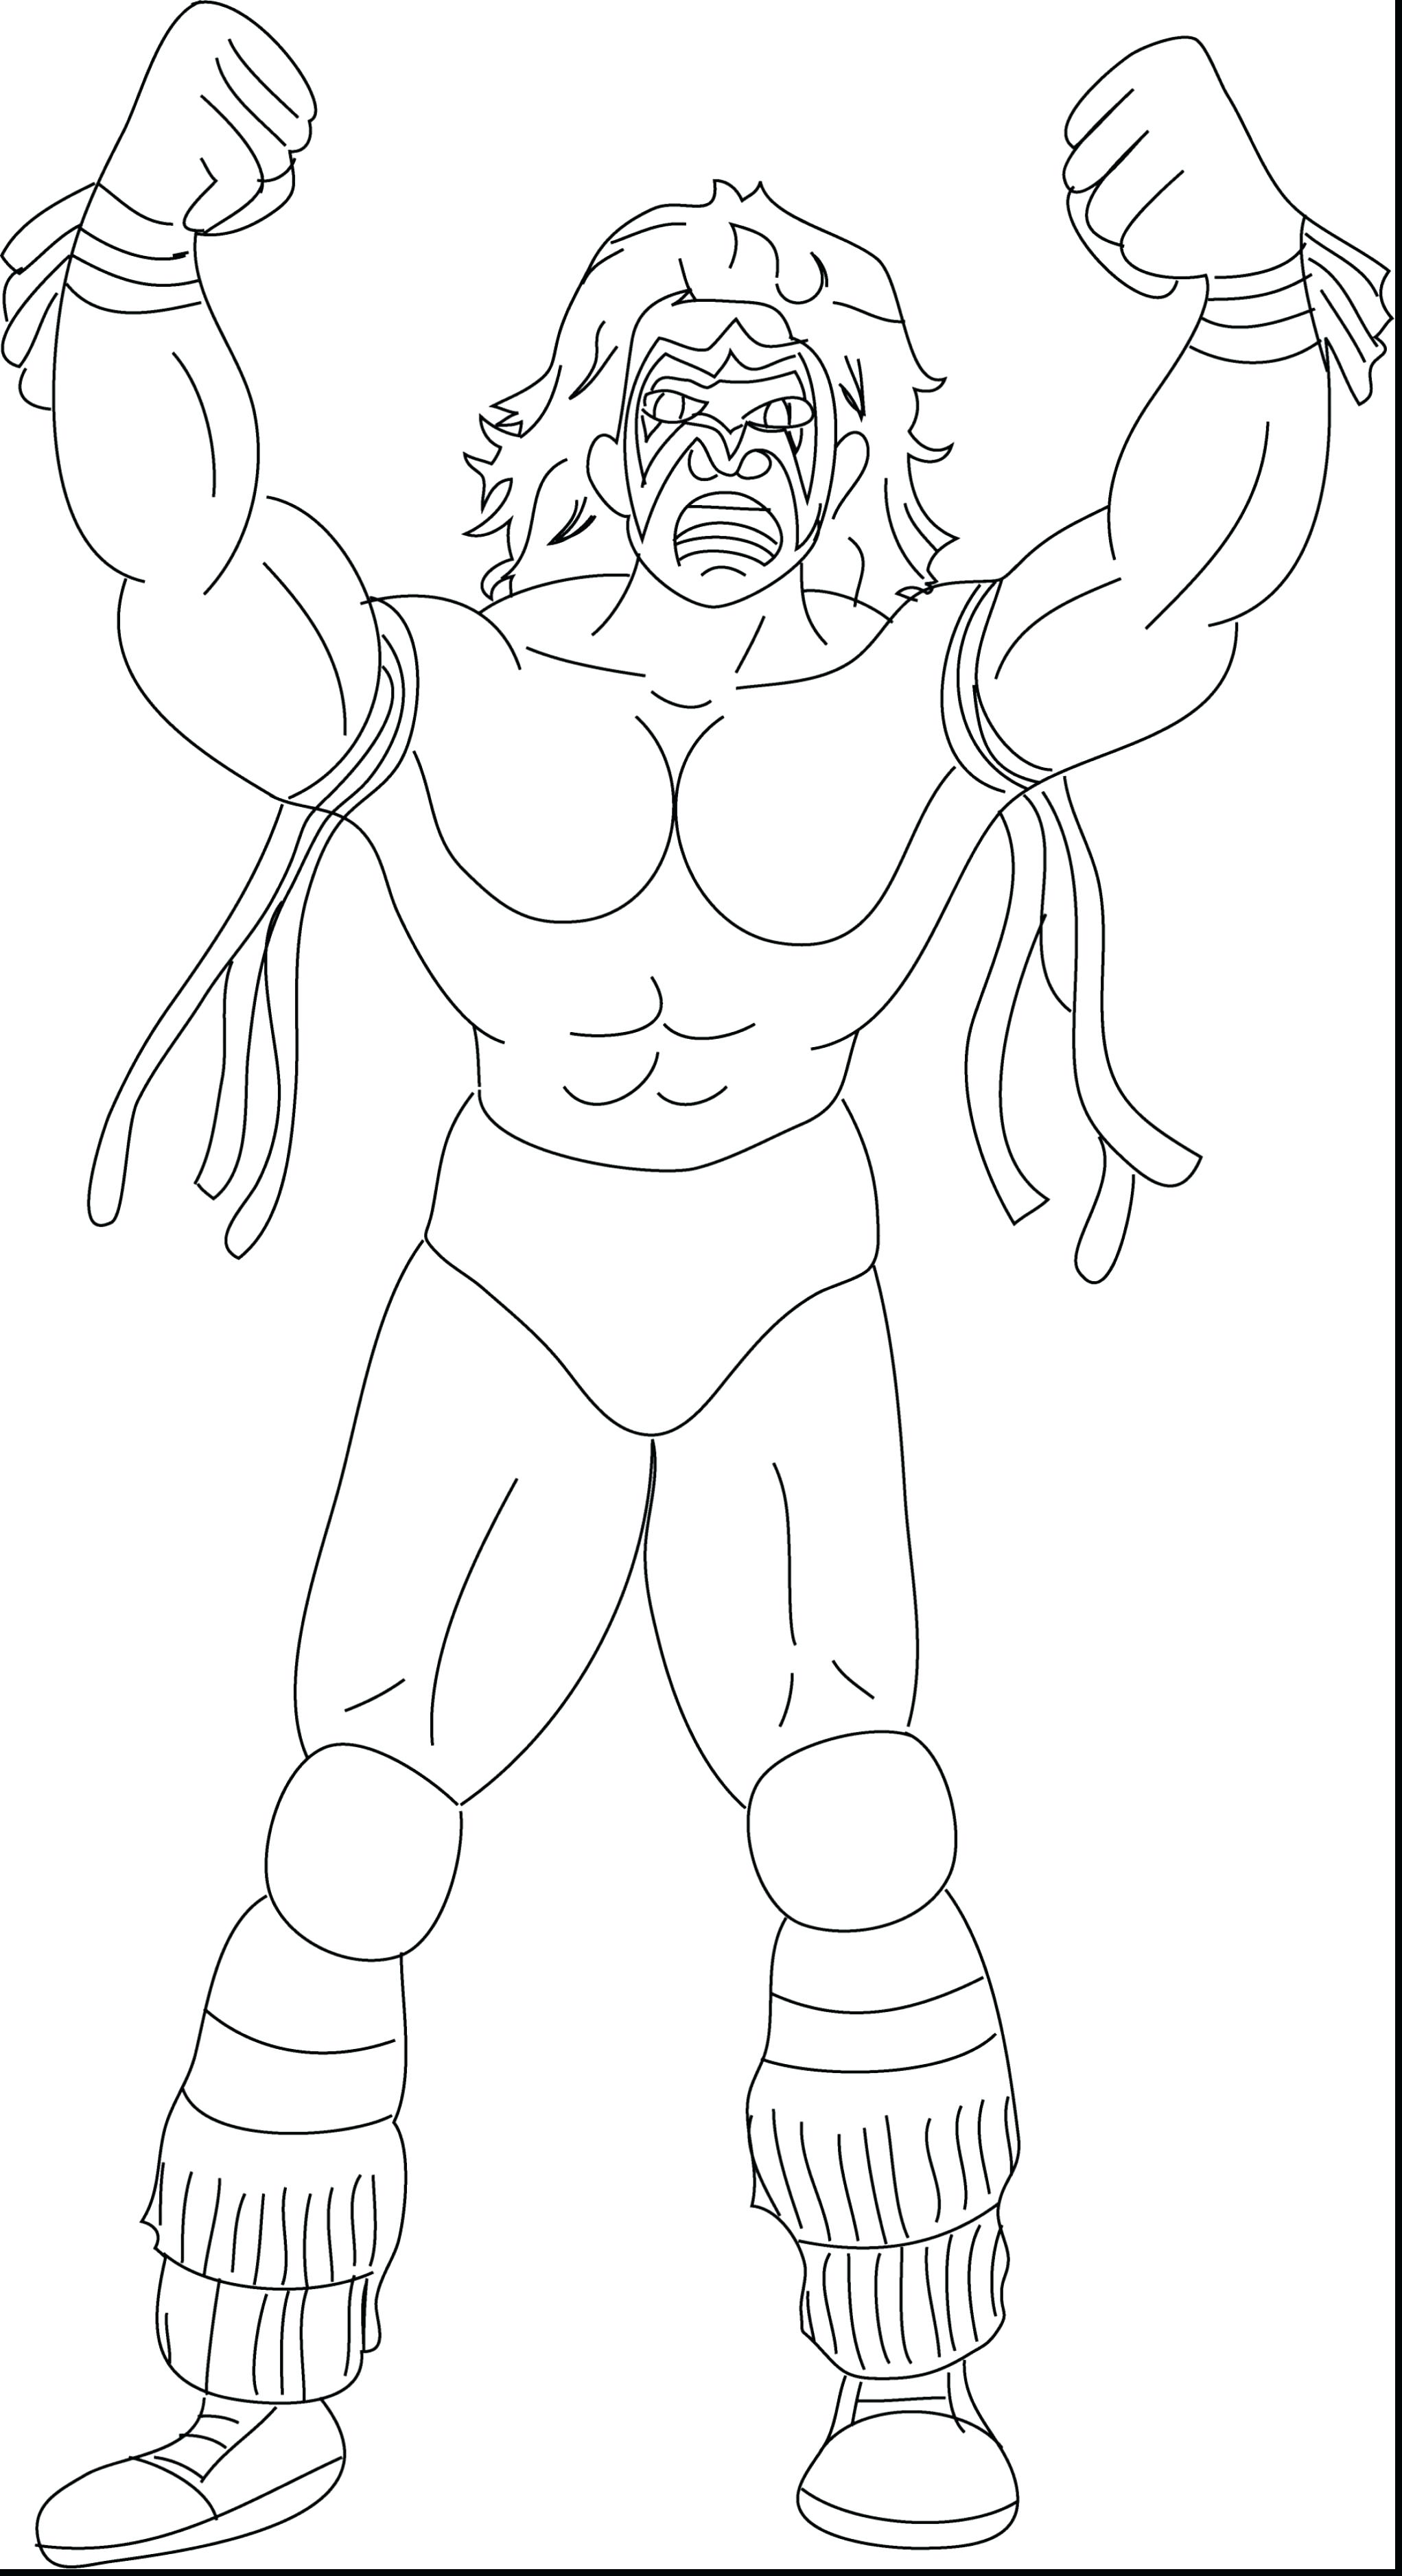 Victorious Justice Coloring Pages at GetColorings.com | Free printable